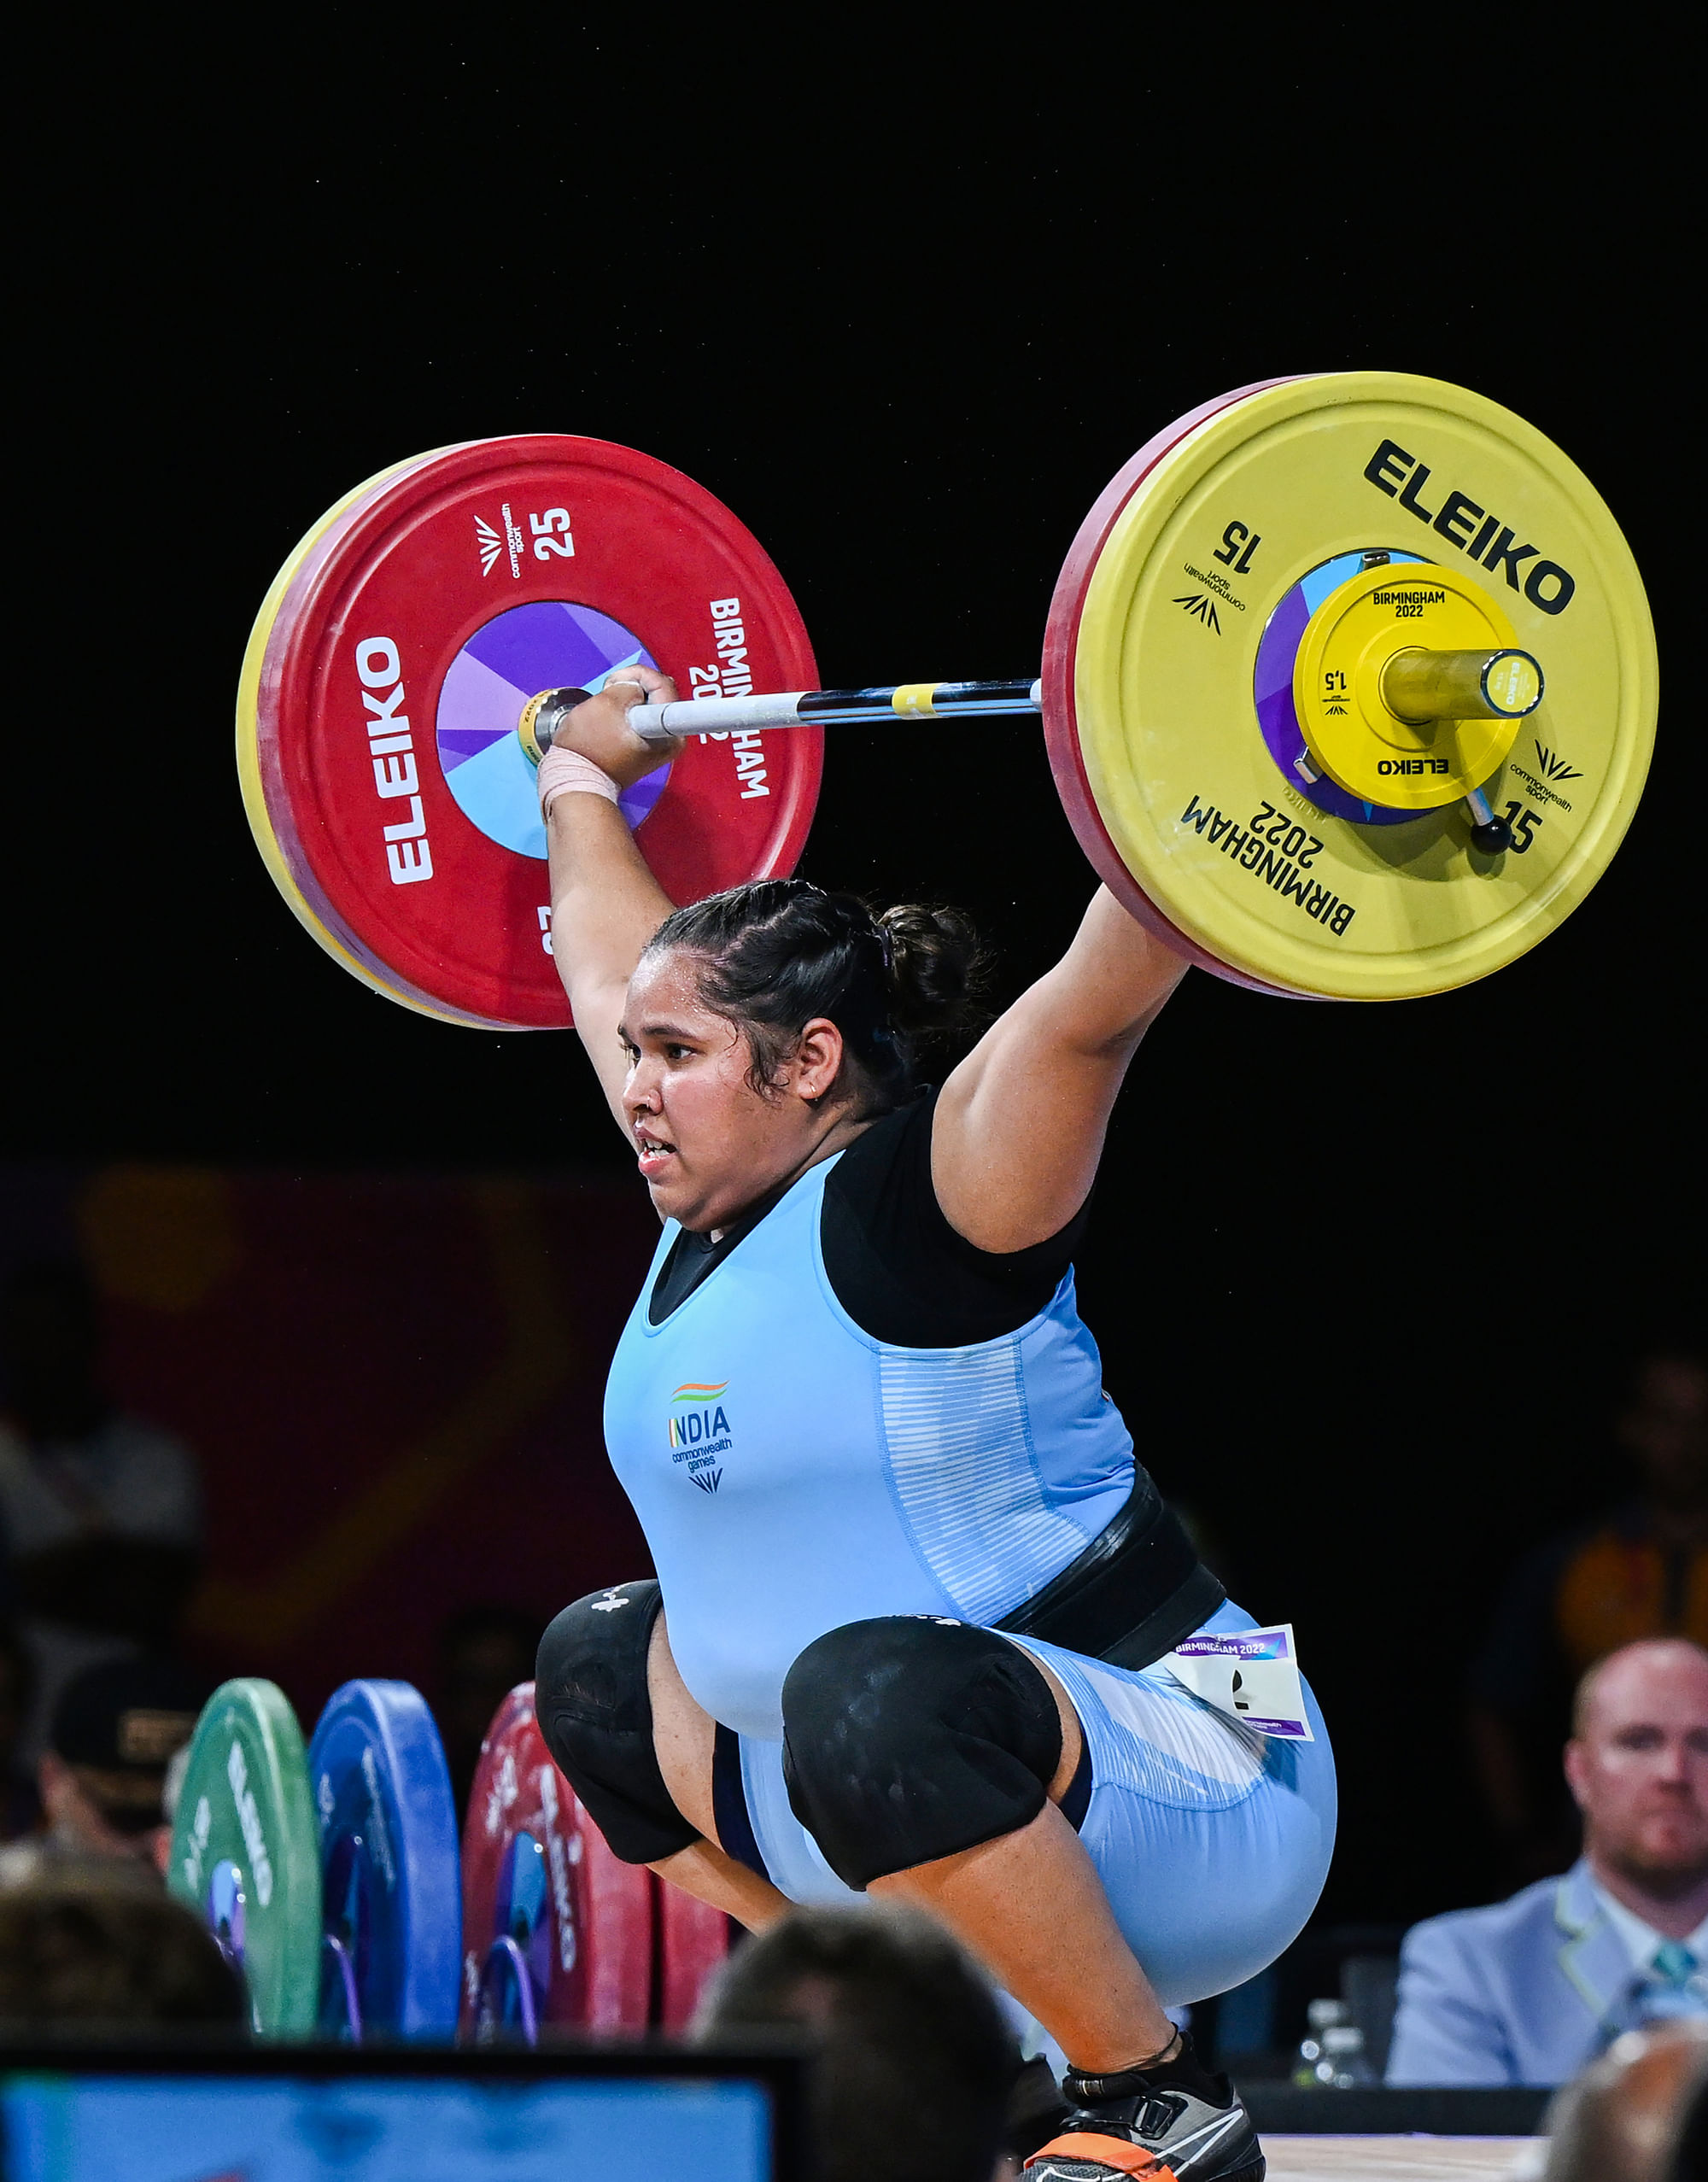 CWG 2022 Live Score Commonwealth Games 2022 Day 6 Latest Updates, CWG Medal Tally, India at CWG, Indian cricket team, boxers, weightlifters